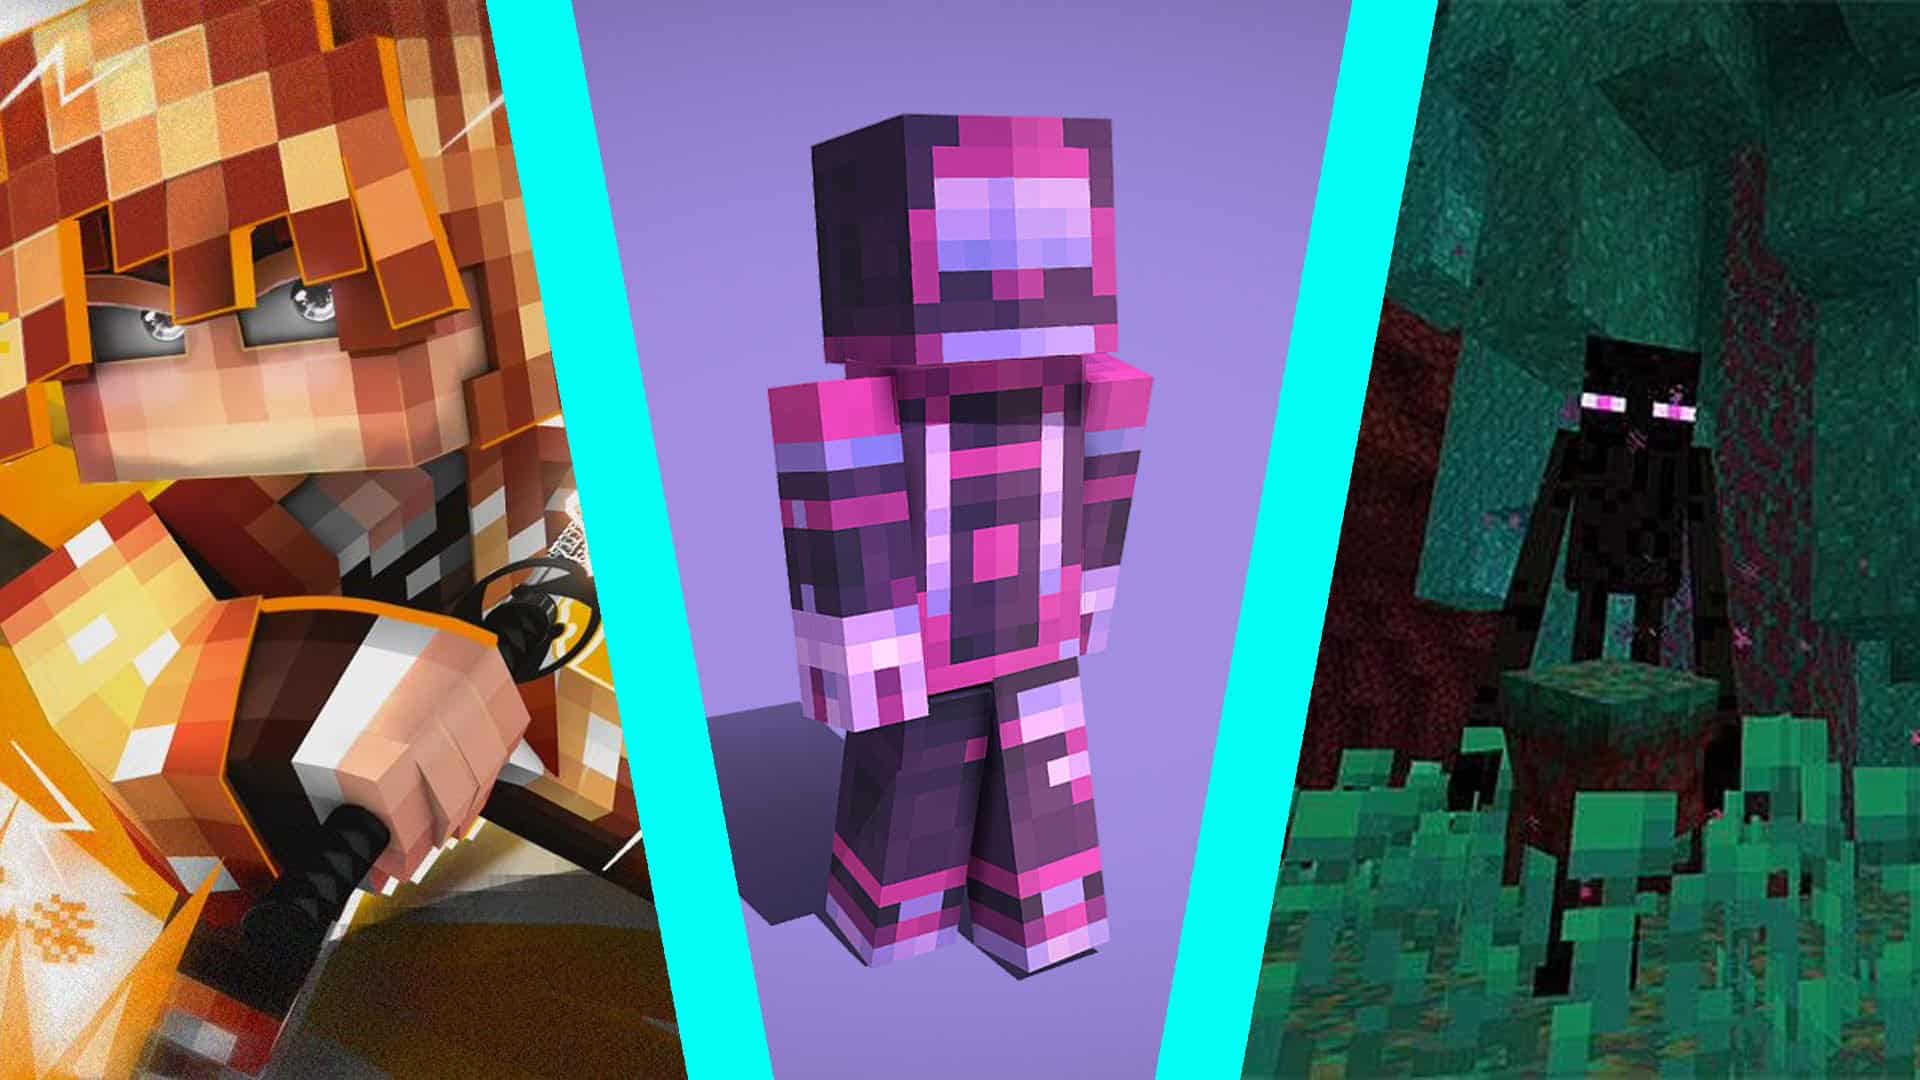 5 Best Minecraft Skins Of 2021 - Fortress of Solitude